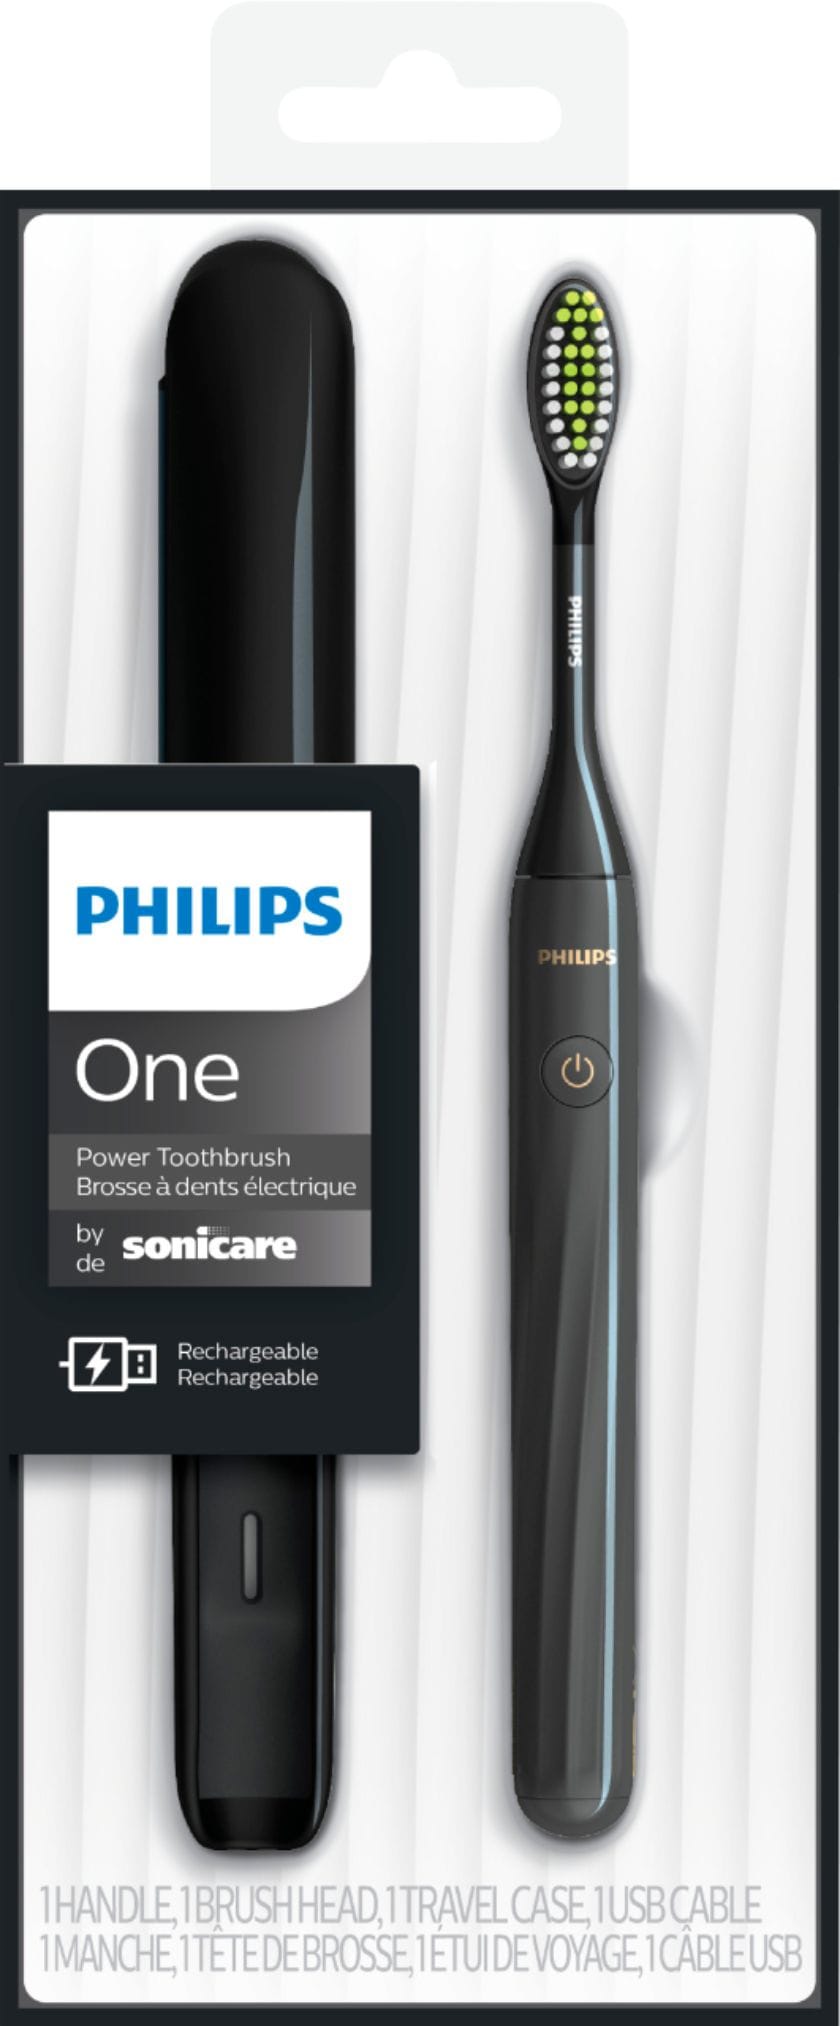 Philips Sonicare - Philips One by Sonicare Rechargeable Toothbrush - Shadow_0